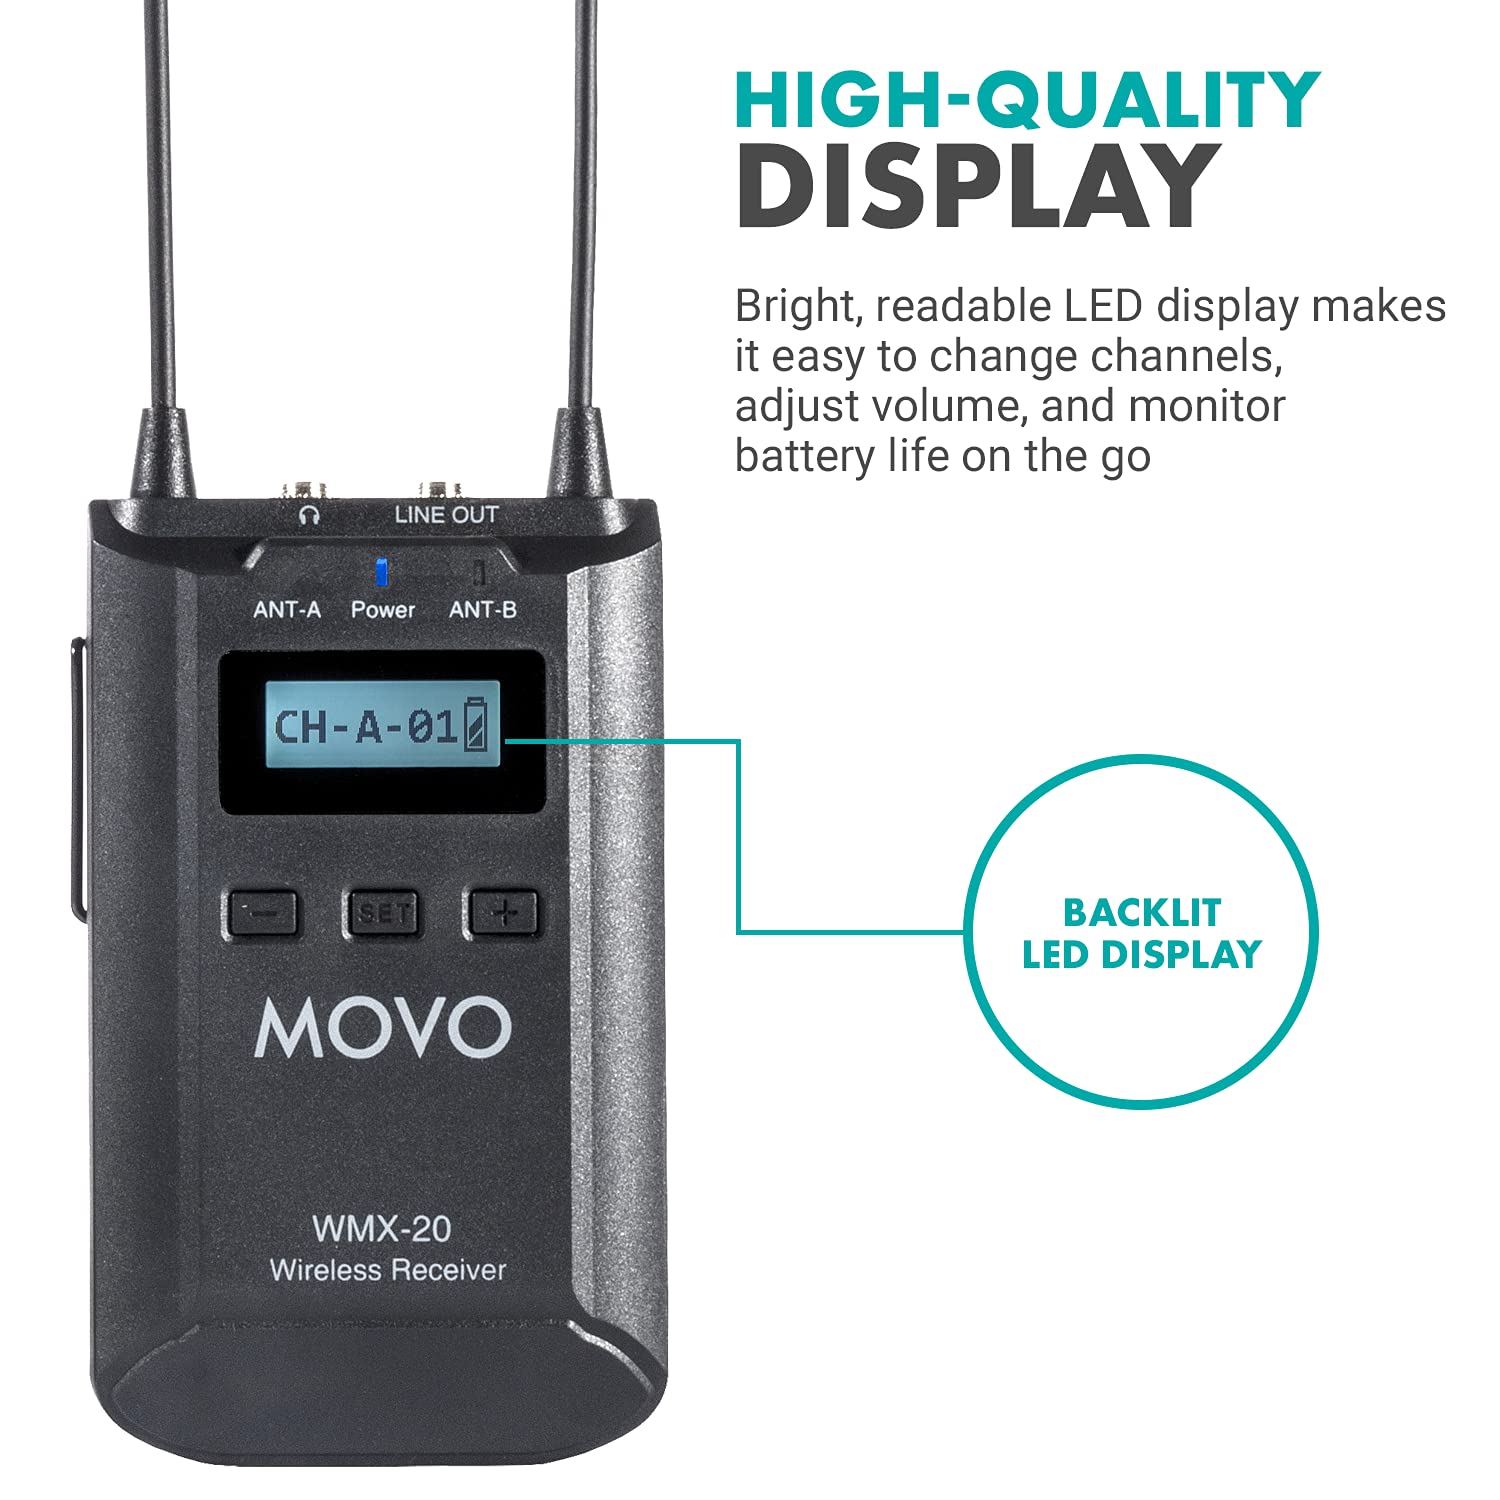 Movo WMX-20-RX Receiver for Wireless Lavalier Microphone System - For WMX-20 UHF Wireless Microphone System - Pairs w/ 2x Lapel Microphone Wireless Transmitters - Headphone Monitoring for Wireless Mic  - Like New